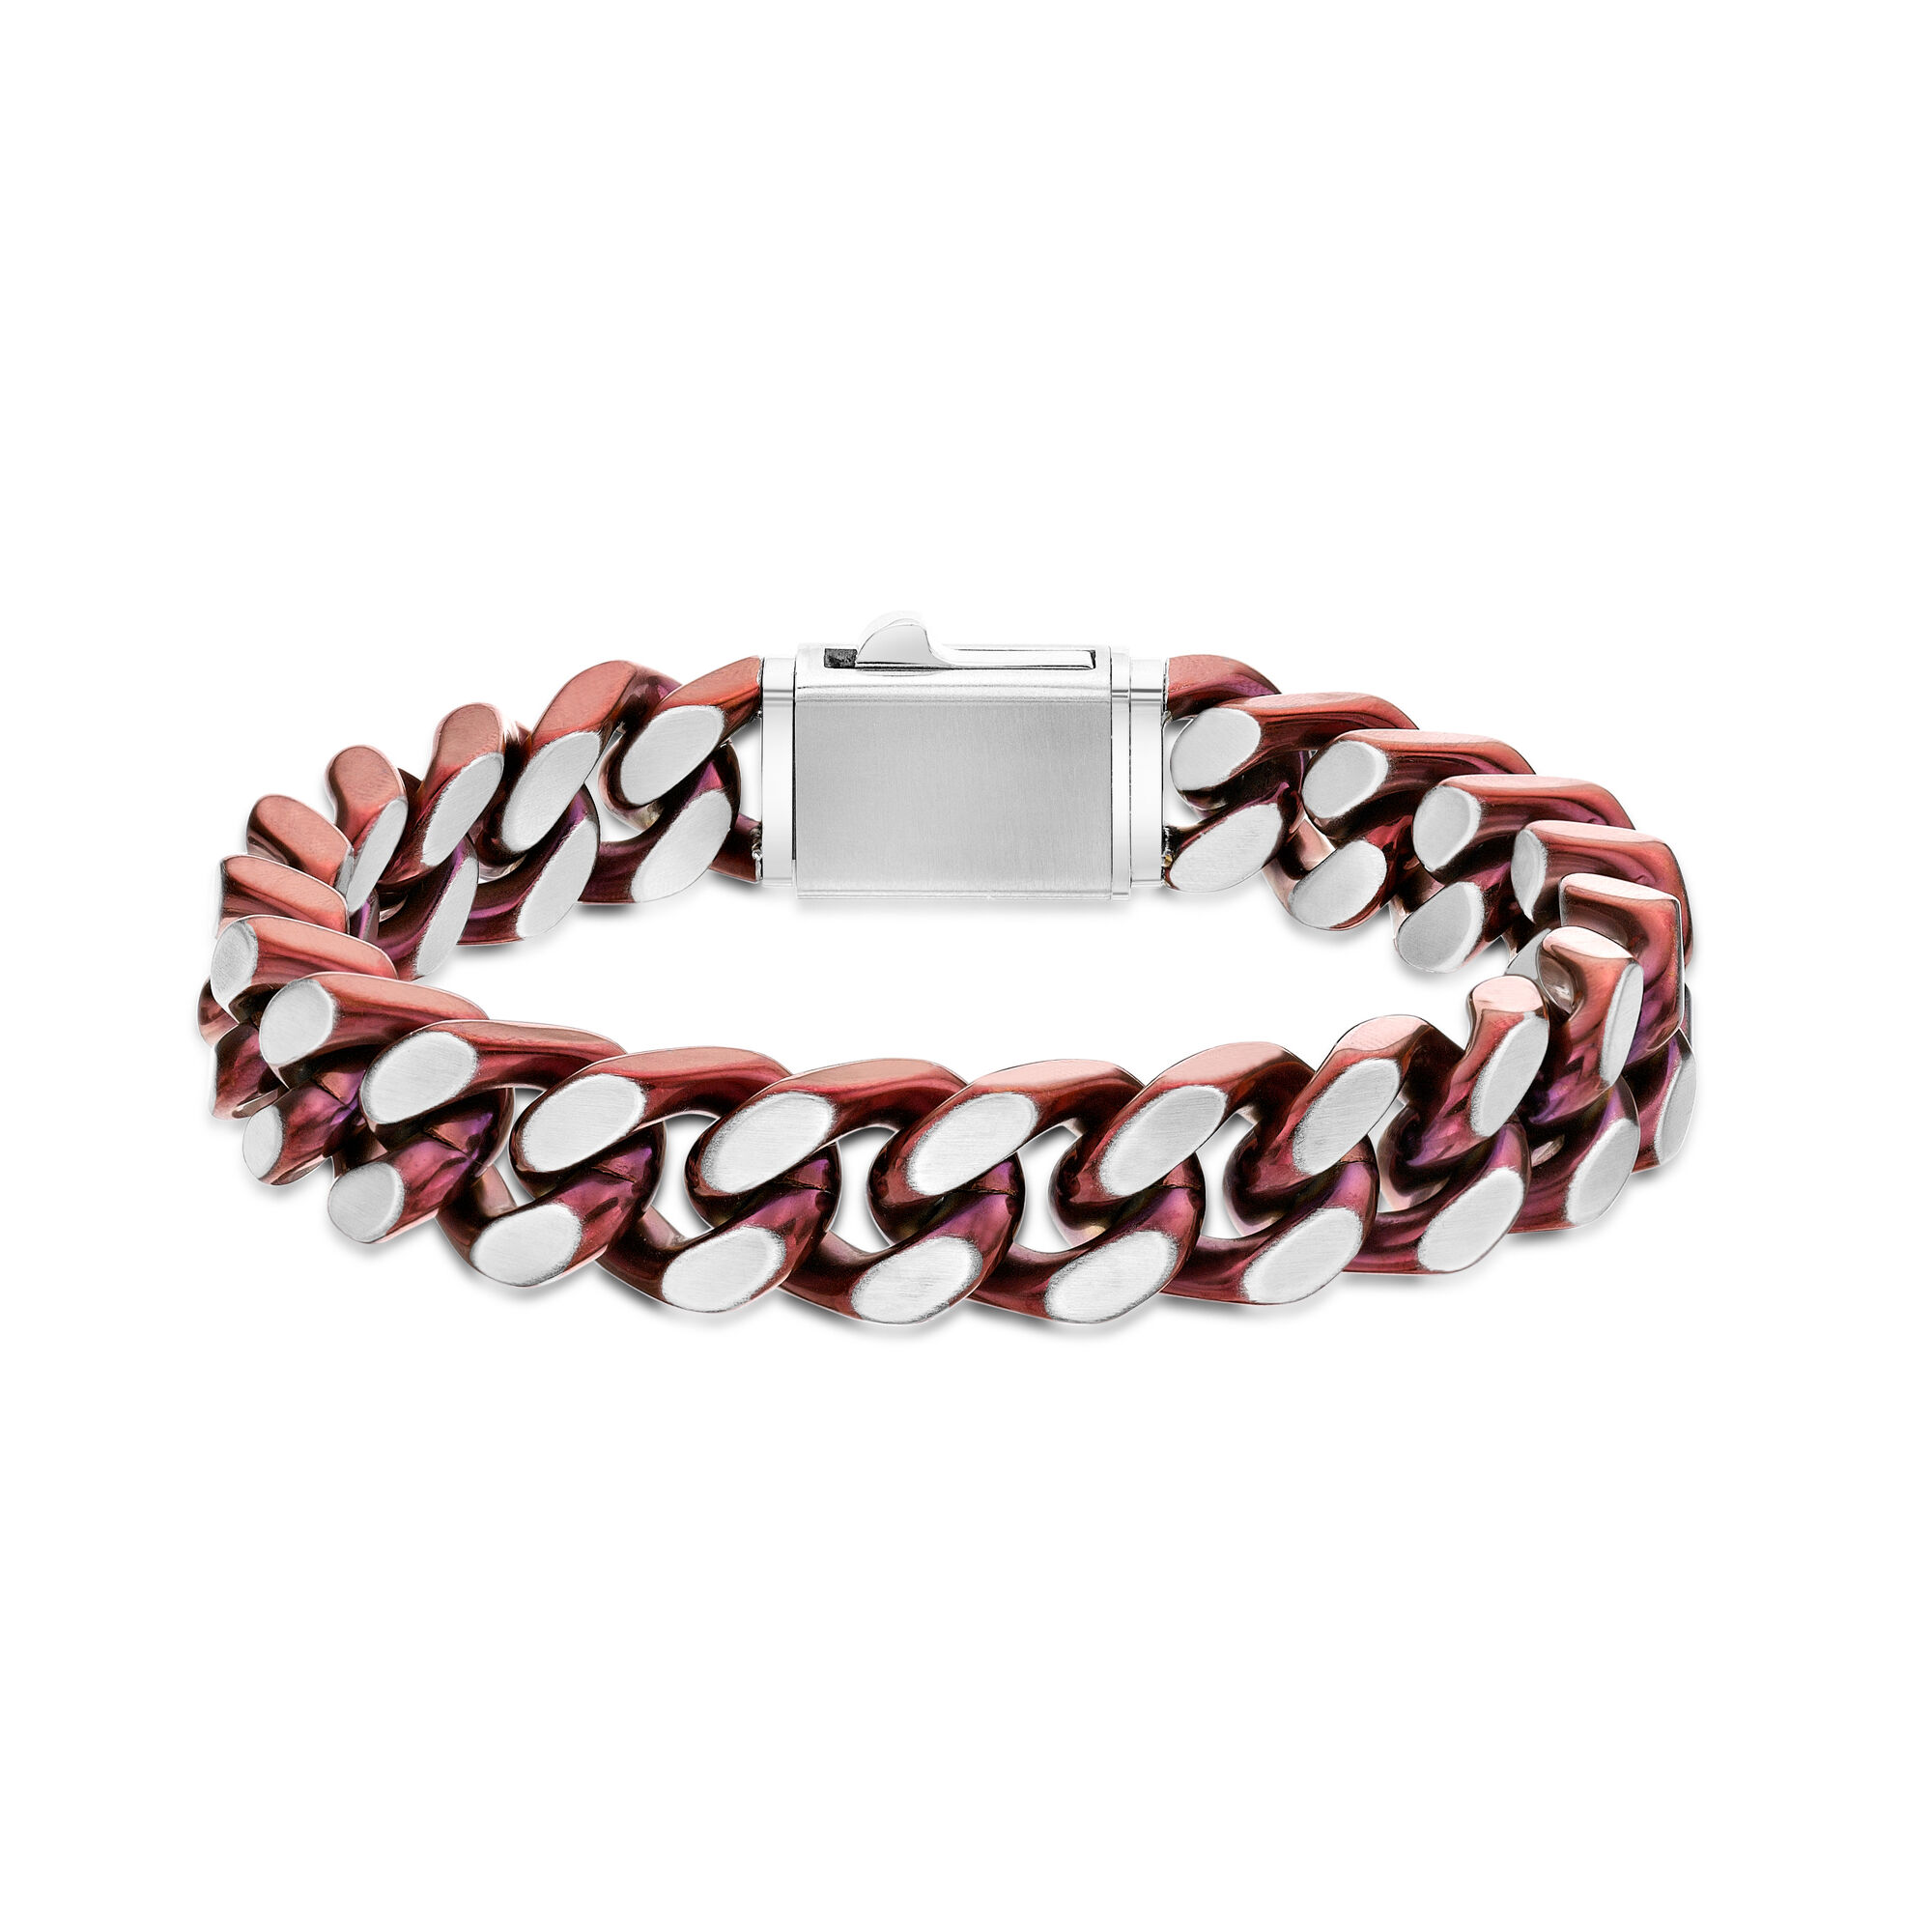 Men's Stainless Steel Red Ion Plated Curb Chain Bracelet - 9 Inch with Push Lock  | Metro Jewelry